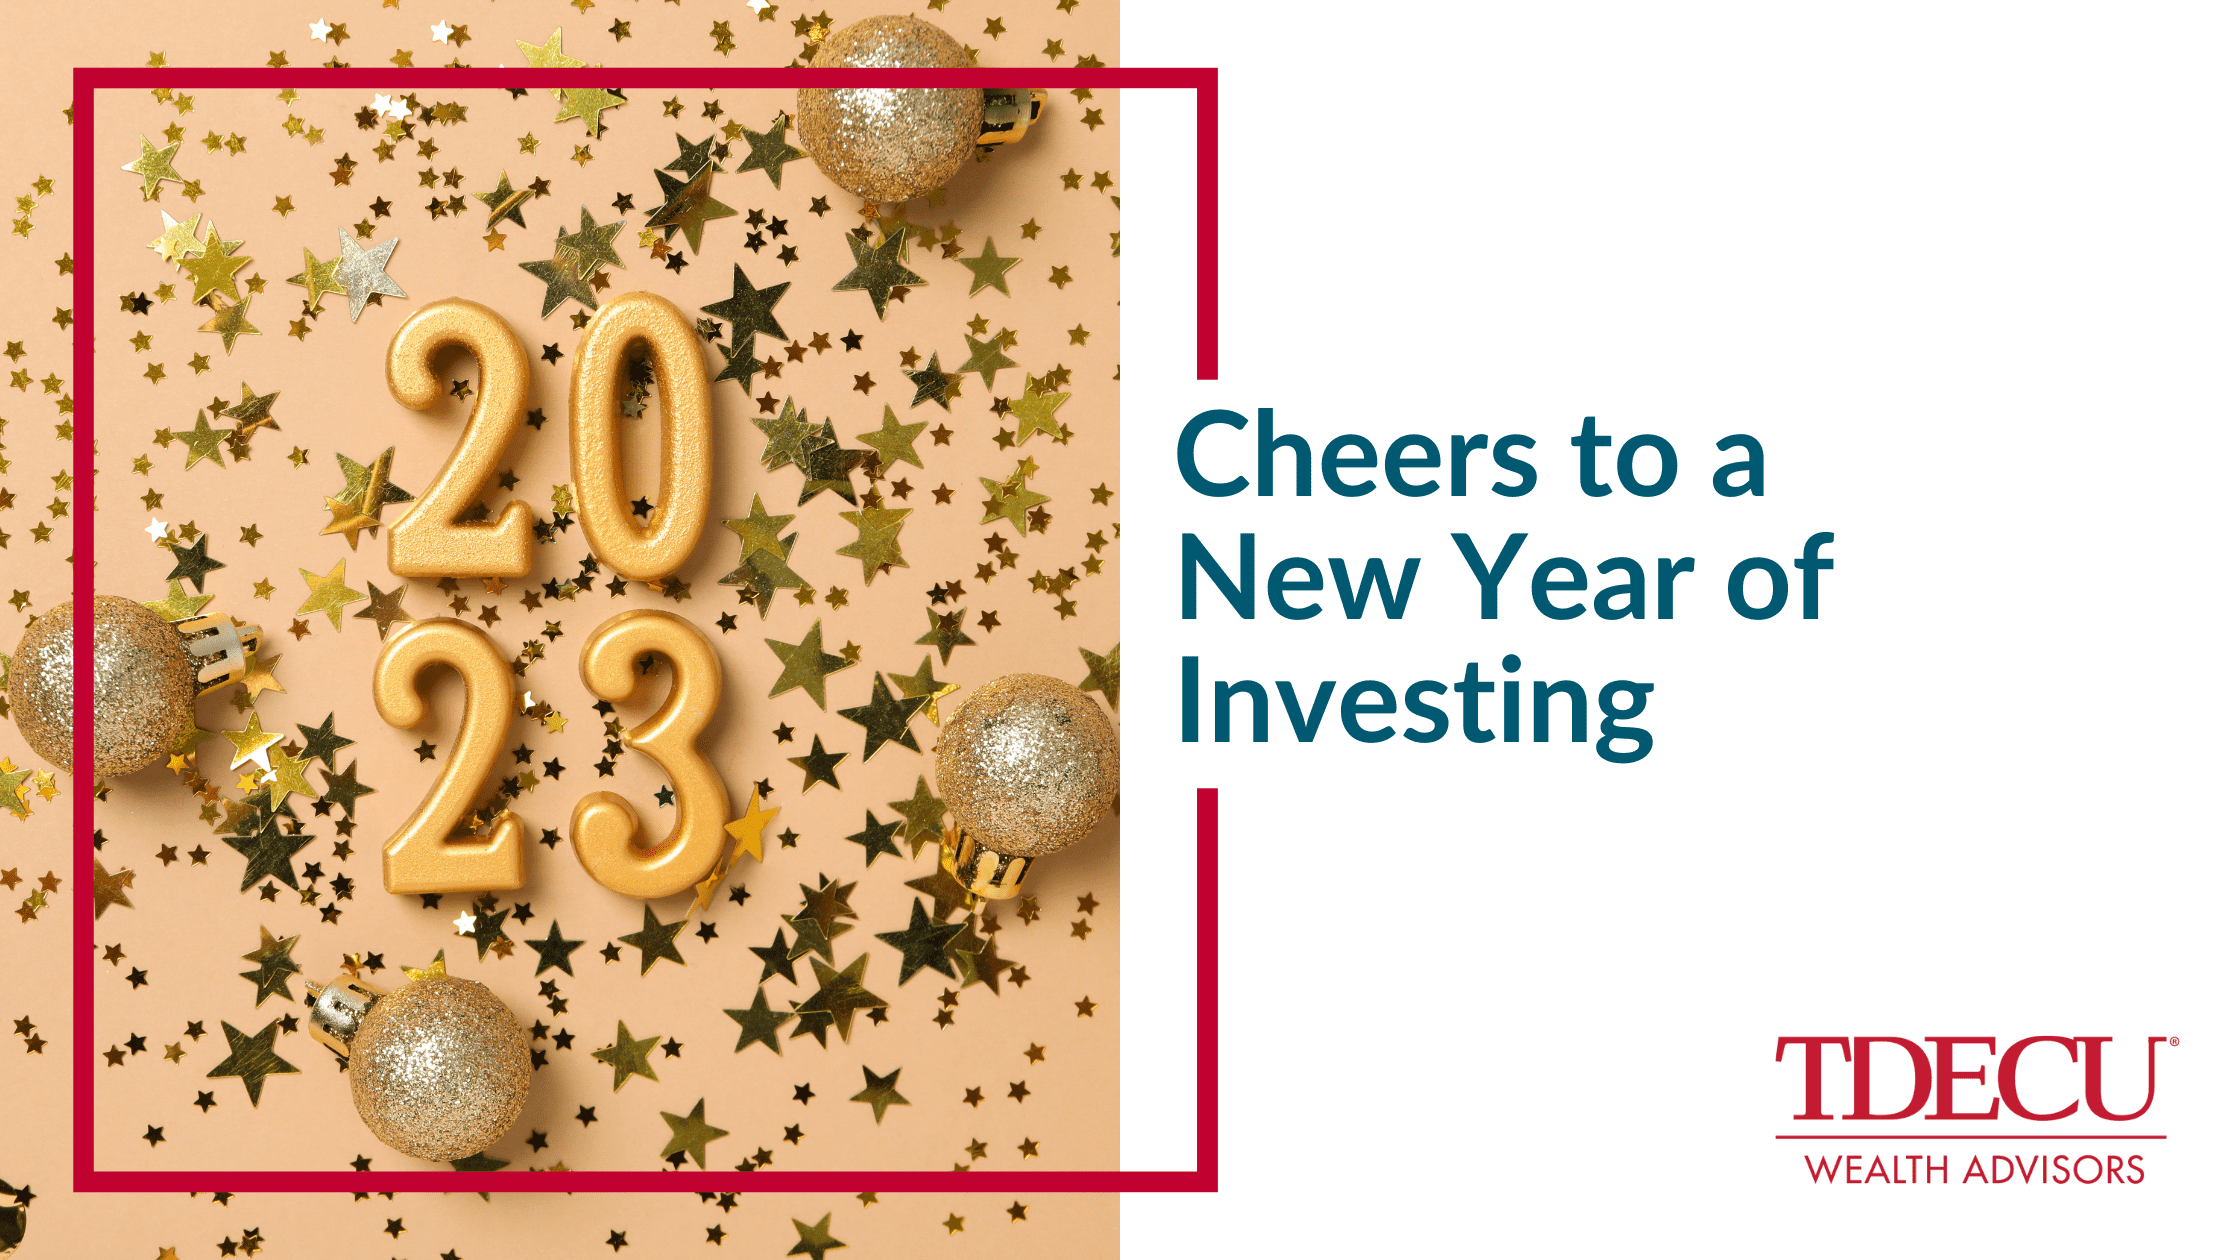 Cheers to a New Year of Investing